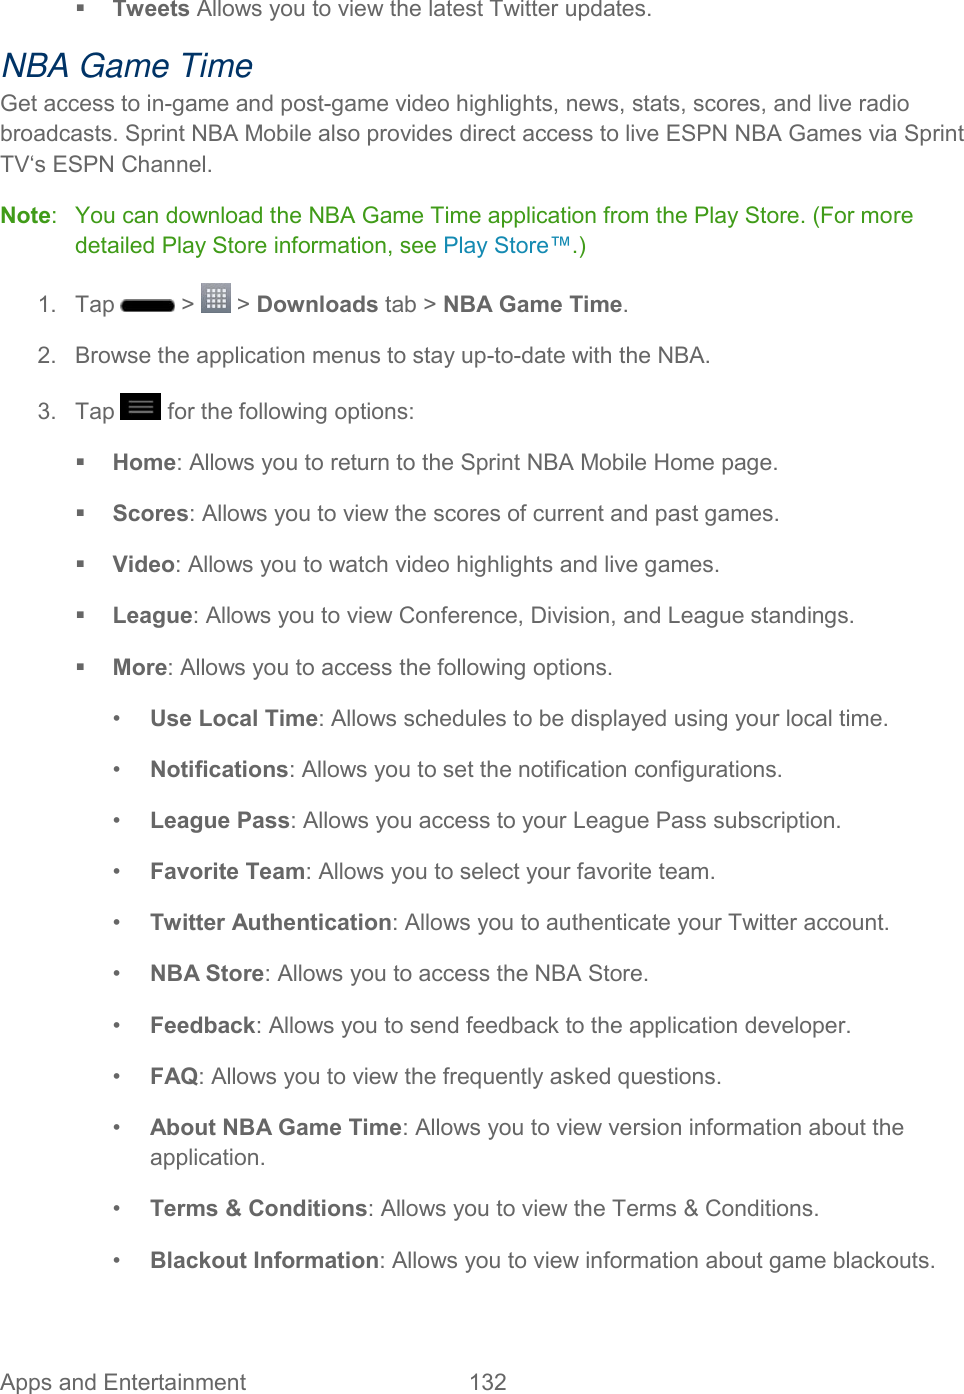  Apps and Entertainment  132    Tweets Allows you to view the latest Twitter updates. NBA Game Time Get access to in-game and post-game video highlights, news, stats, scores, and live radio broadcasts. Sprint NBA Mobile also provides direct access to live ESPN NBA Games via Sprint TV‘s ESPN Channel. Note:   You can download the NBA Game Time application from the Play Store. (For more detailed Play Store information, see Play Store™.) 1.  Tap   &gt;   &gt; Downloads tab &gt; NBA Game Time. 2.  Browse the application menus to stay up-to-date with the NBA. 3.  Tap   for the following options:  Home: Allows you to return to the Sprint NBA Mobile Home page.  Scores: Allows you to view the scores of current and past games.  Video: Allows you to watch video highlights and live games.  League: Allows you to view Conference, Division, and League standings.  More: Allows you to access the following options. •  Use Local Time: Allows schedules to be displayed using your local time. •  Notifications: Allows you to set the notification configurations. •  League Pass: Allows you access to your League Pass subscription. •  Favorite Team: Allows you to select your favorite team. •  Twitter Authentication: Allows you to authenticate your Twitter account. •  NBA Store: Allows you to access the NBA Store. •  Feedback: Allows you to send feedback to the application developer. •  FAQ: Allows you to view the frequently asked questions. •  About NBA Game Time: Allows you to view version information about the application. •  Terms &amp; Conditions: Allows you to view the Terms &amp; Conditions. •  Blackout Information: Allows you to view information about game blackouts. 